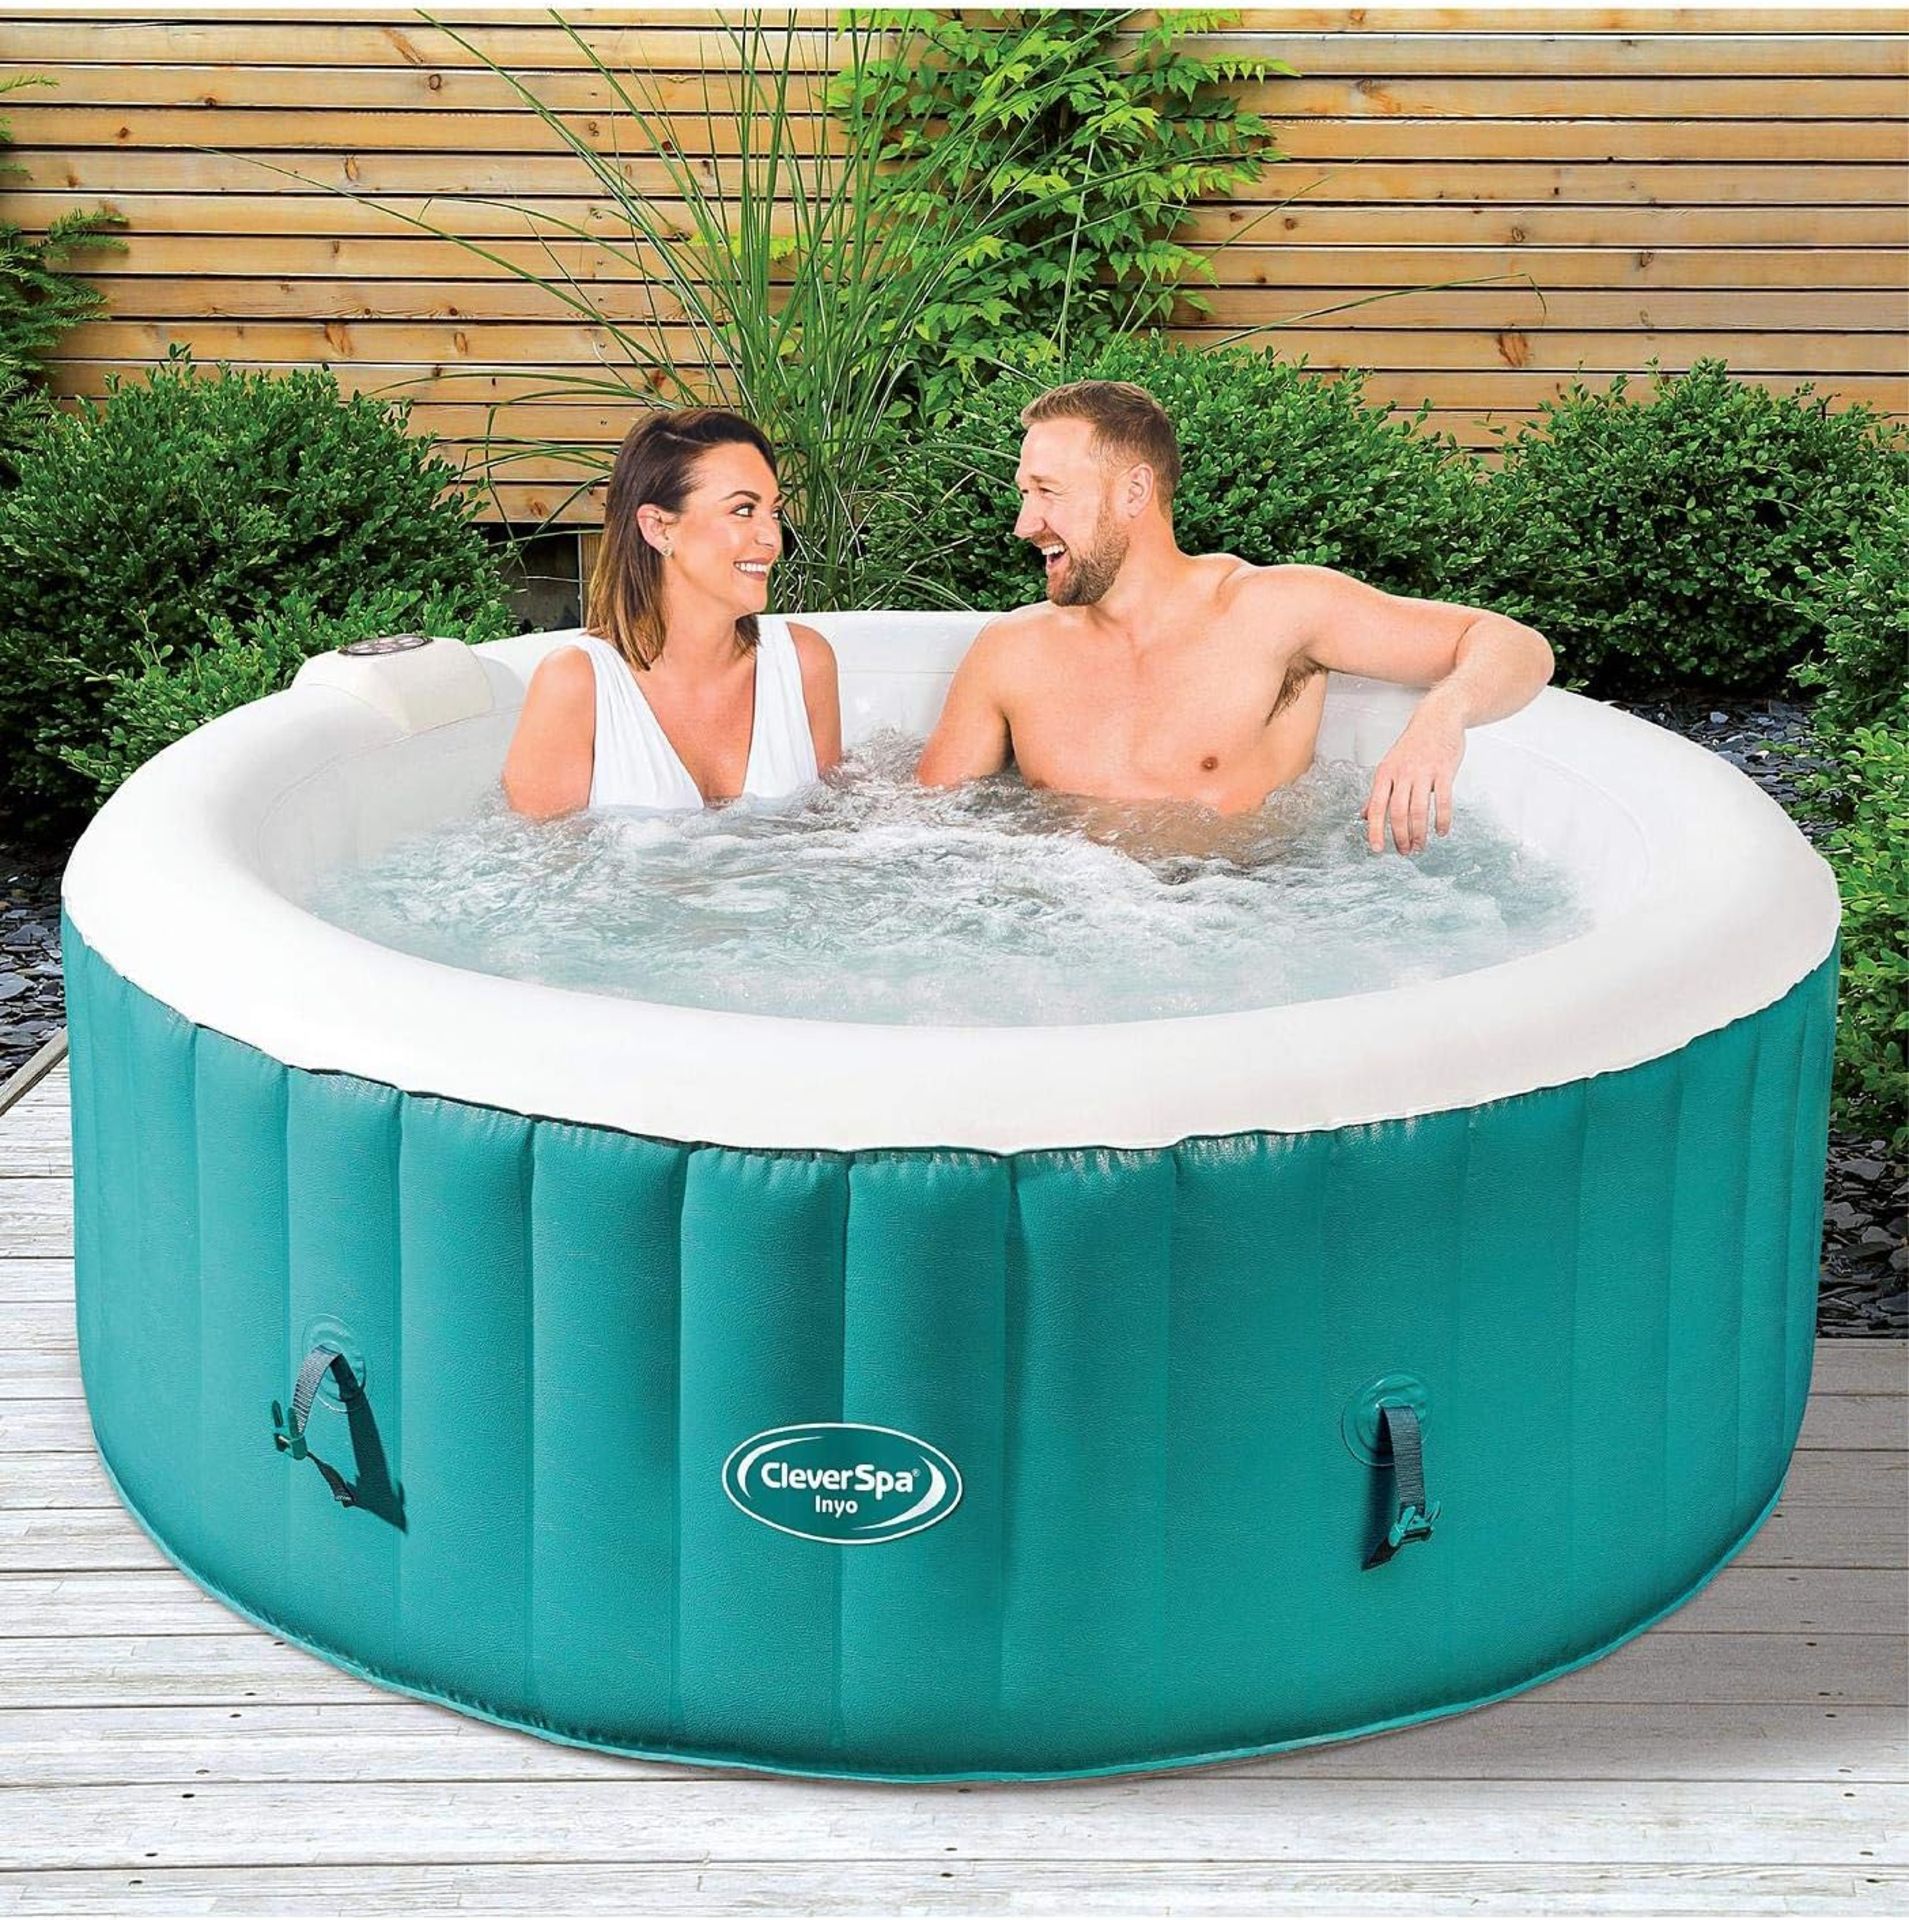 New & Boxed CleverSpa Inyo 4 Person Hot Tub. RRP £499.99. There is no occasion or family get - Image 2 of 5